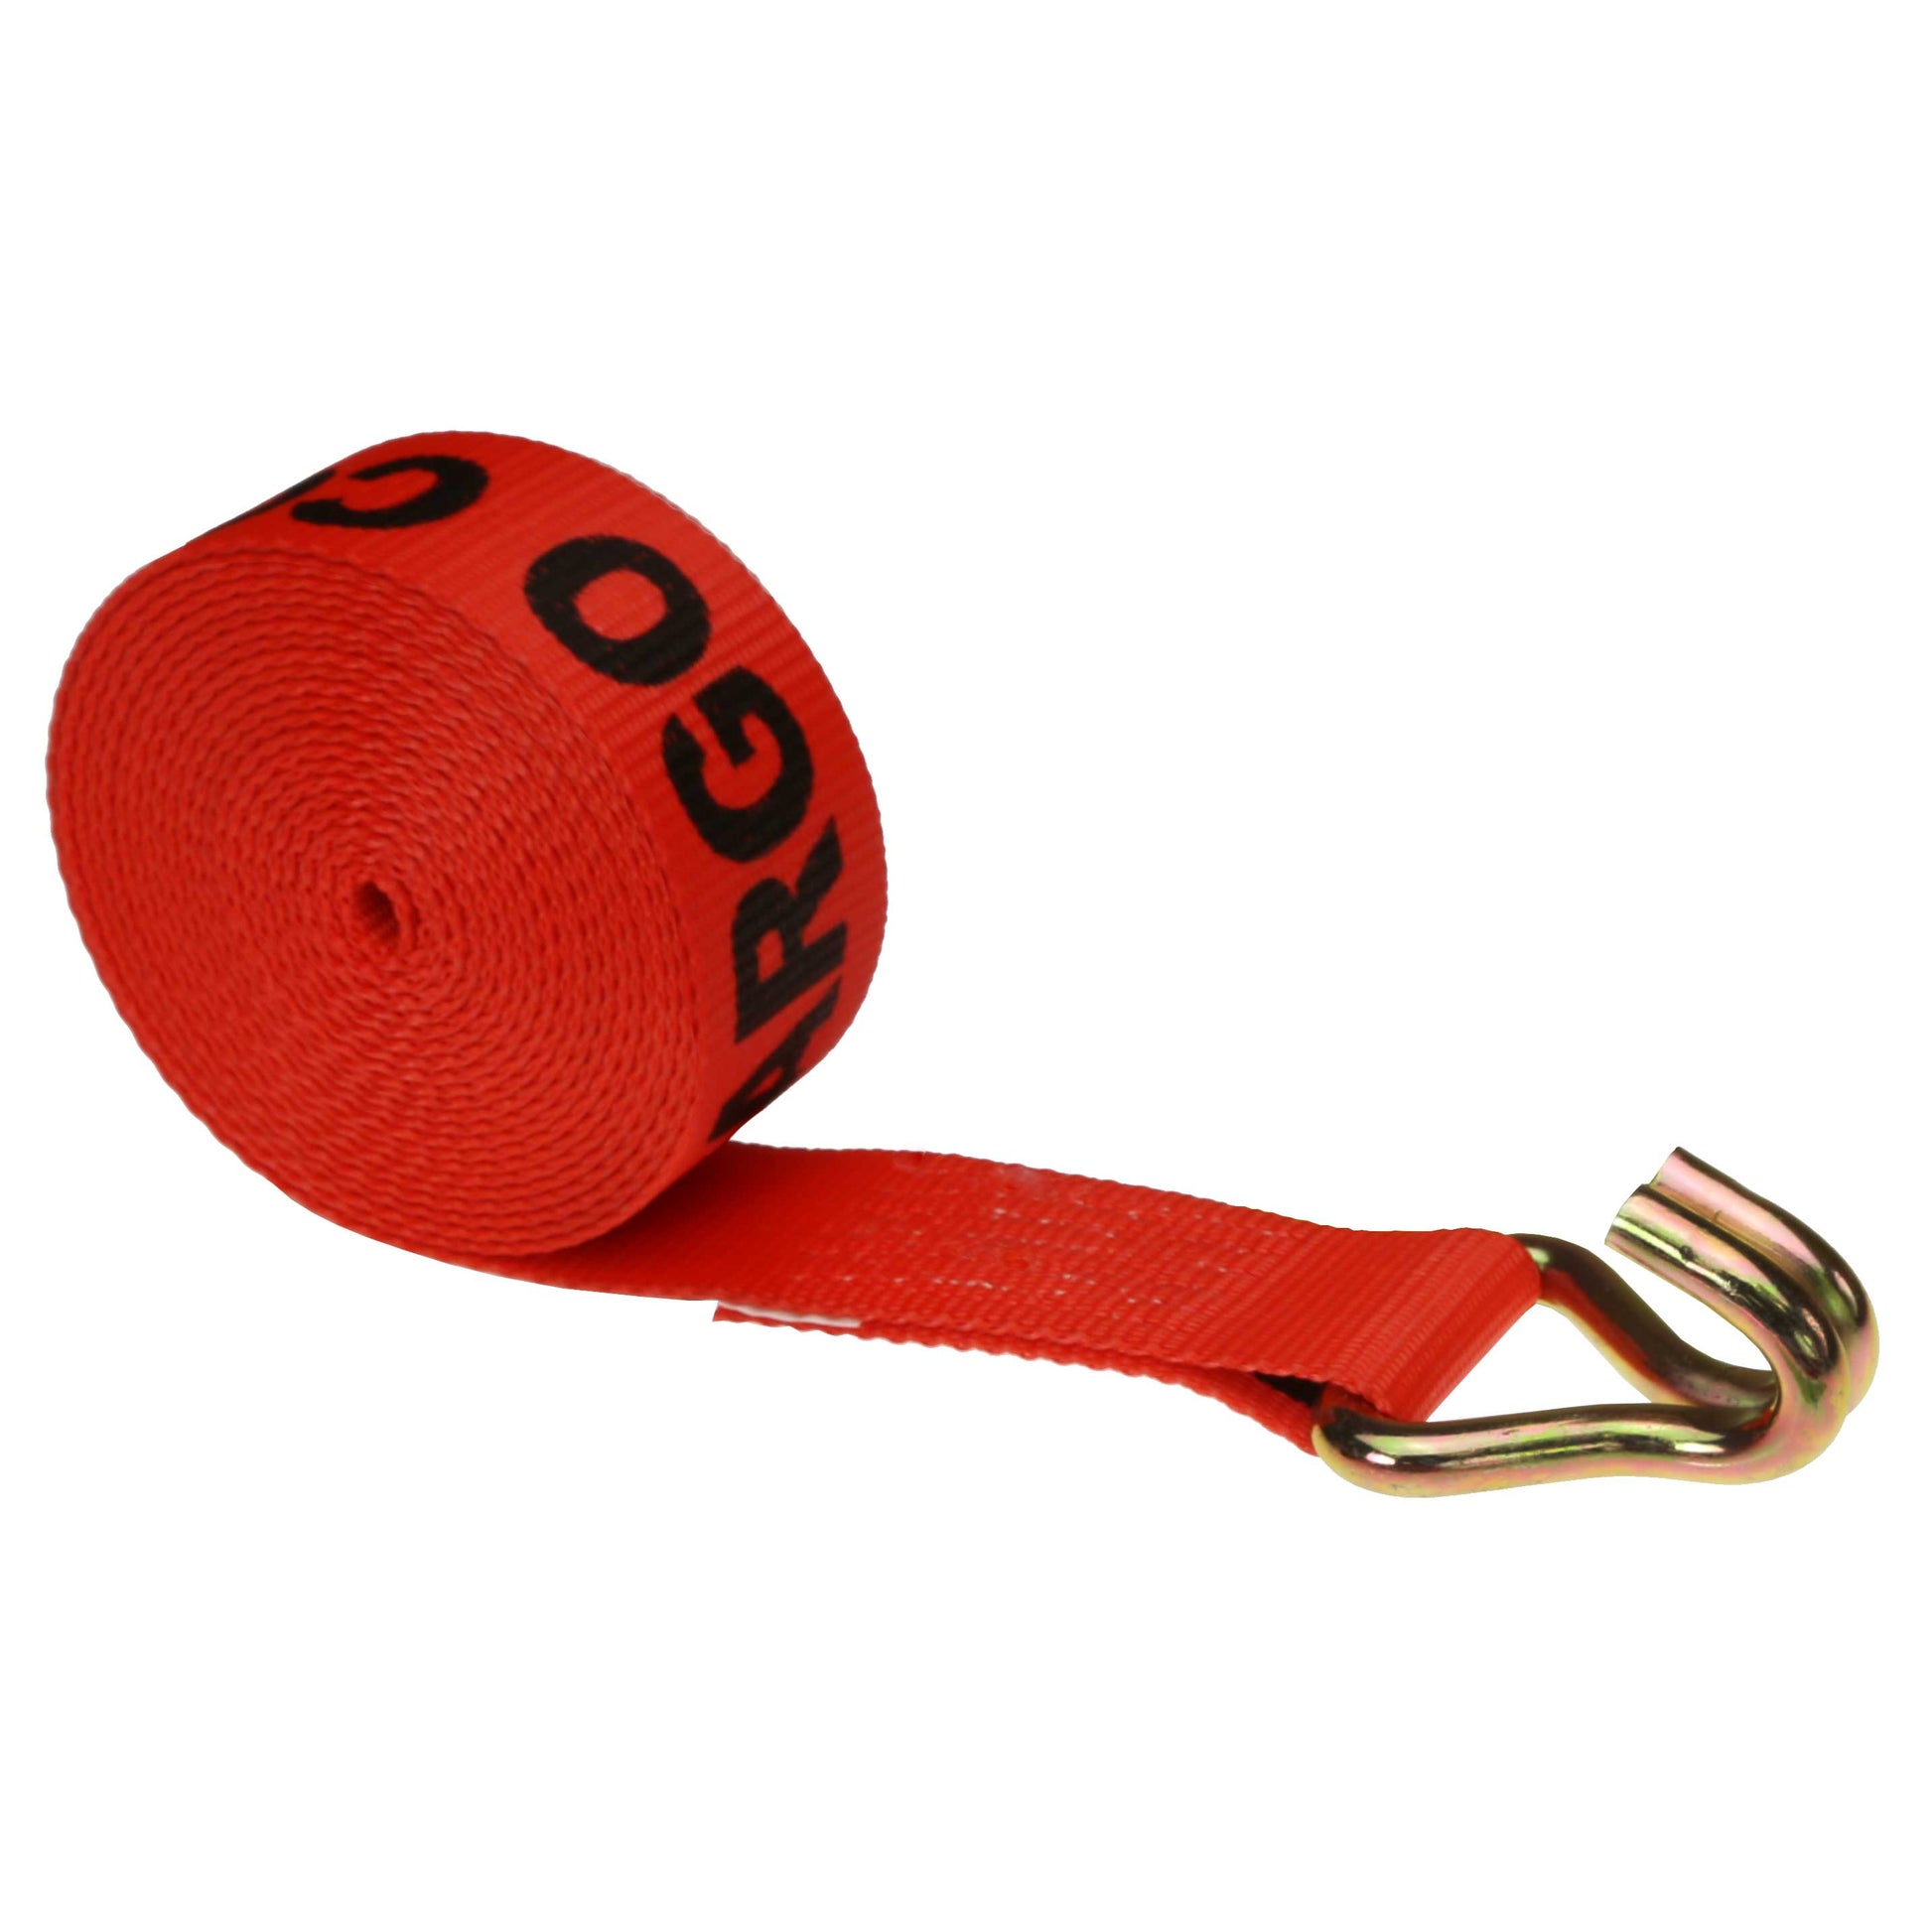 2 inch x 20 foot Red Winch Strap with Wire Hook